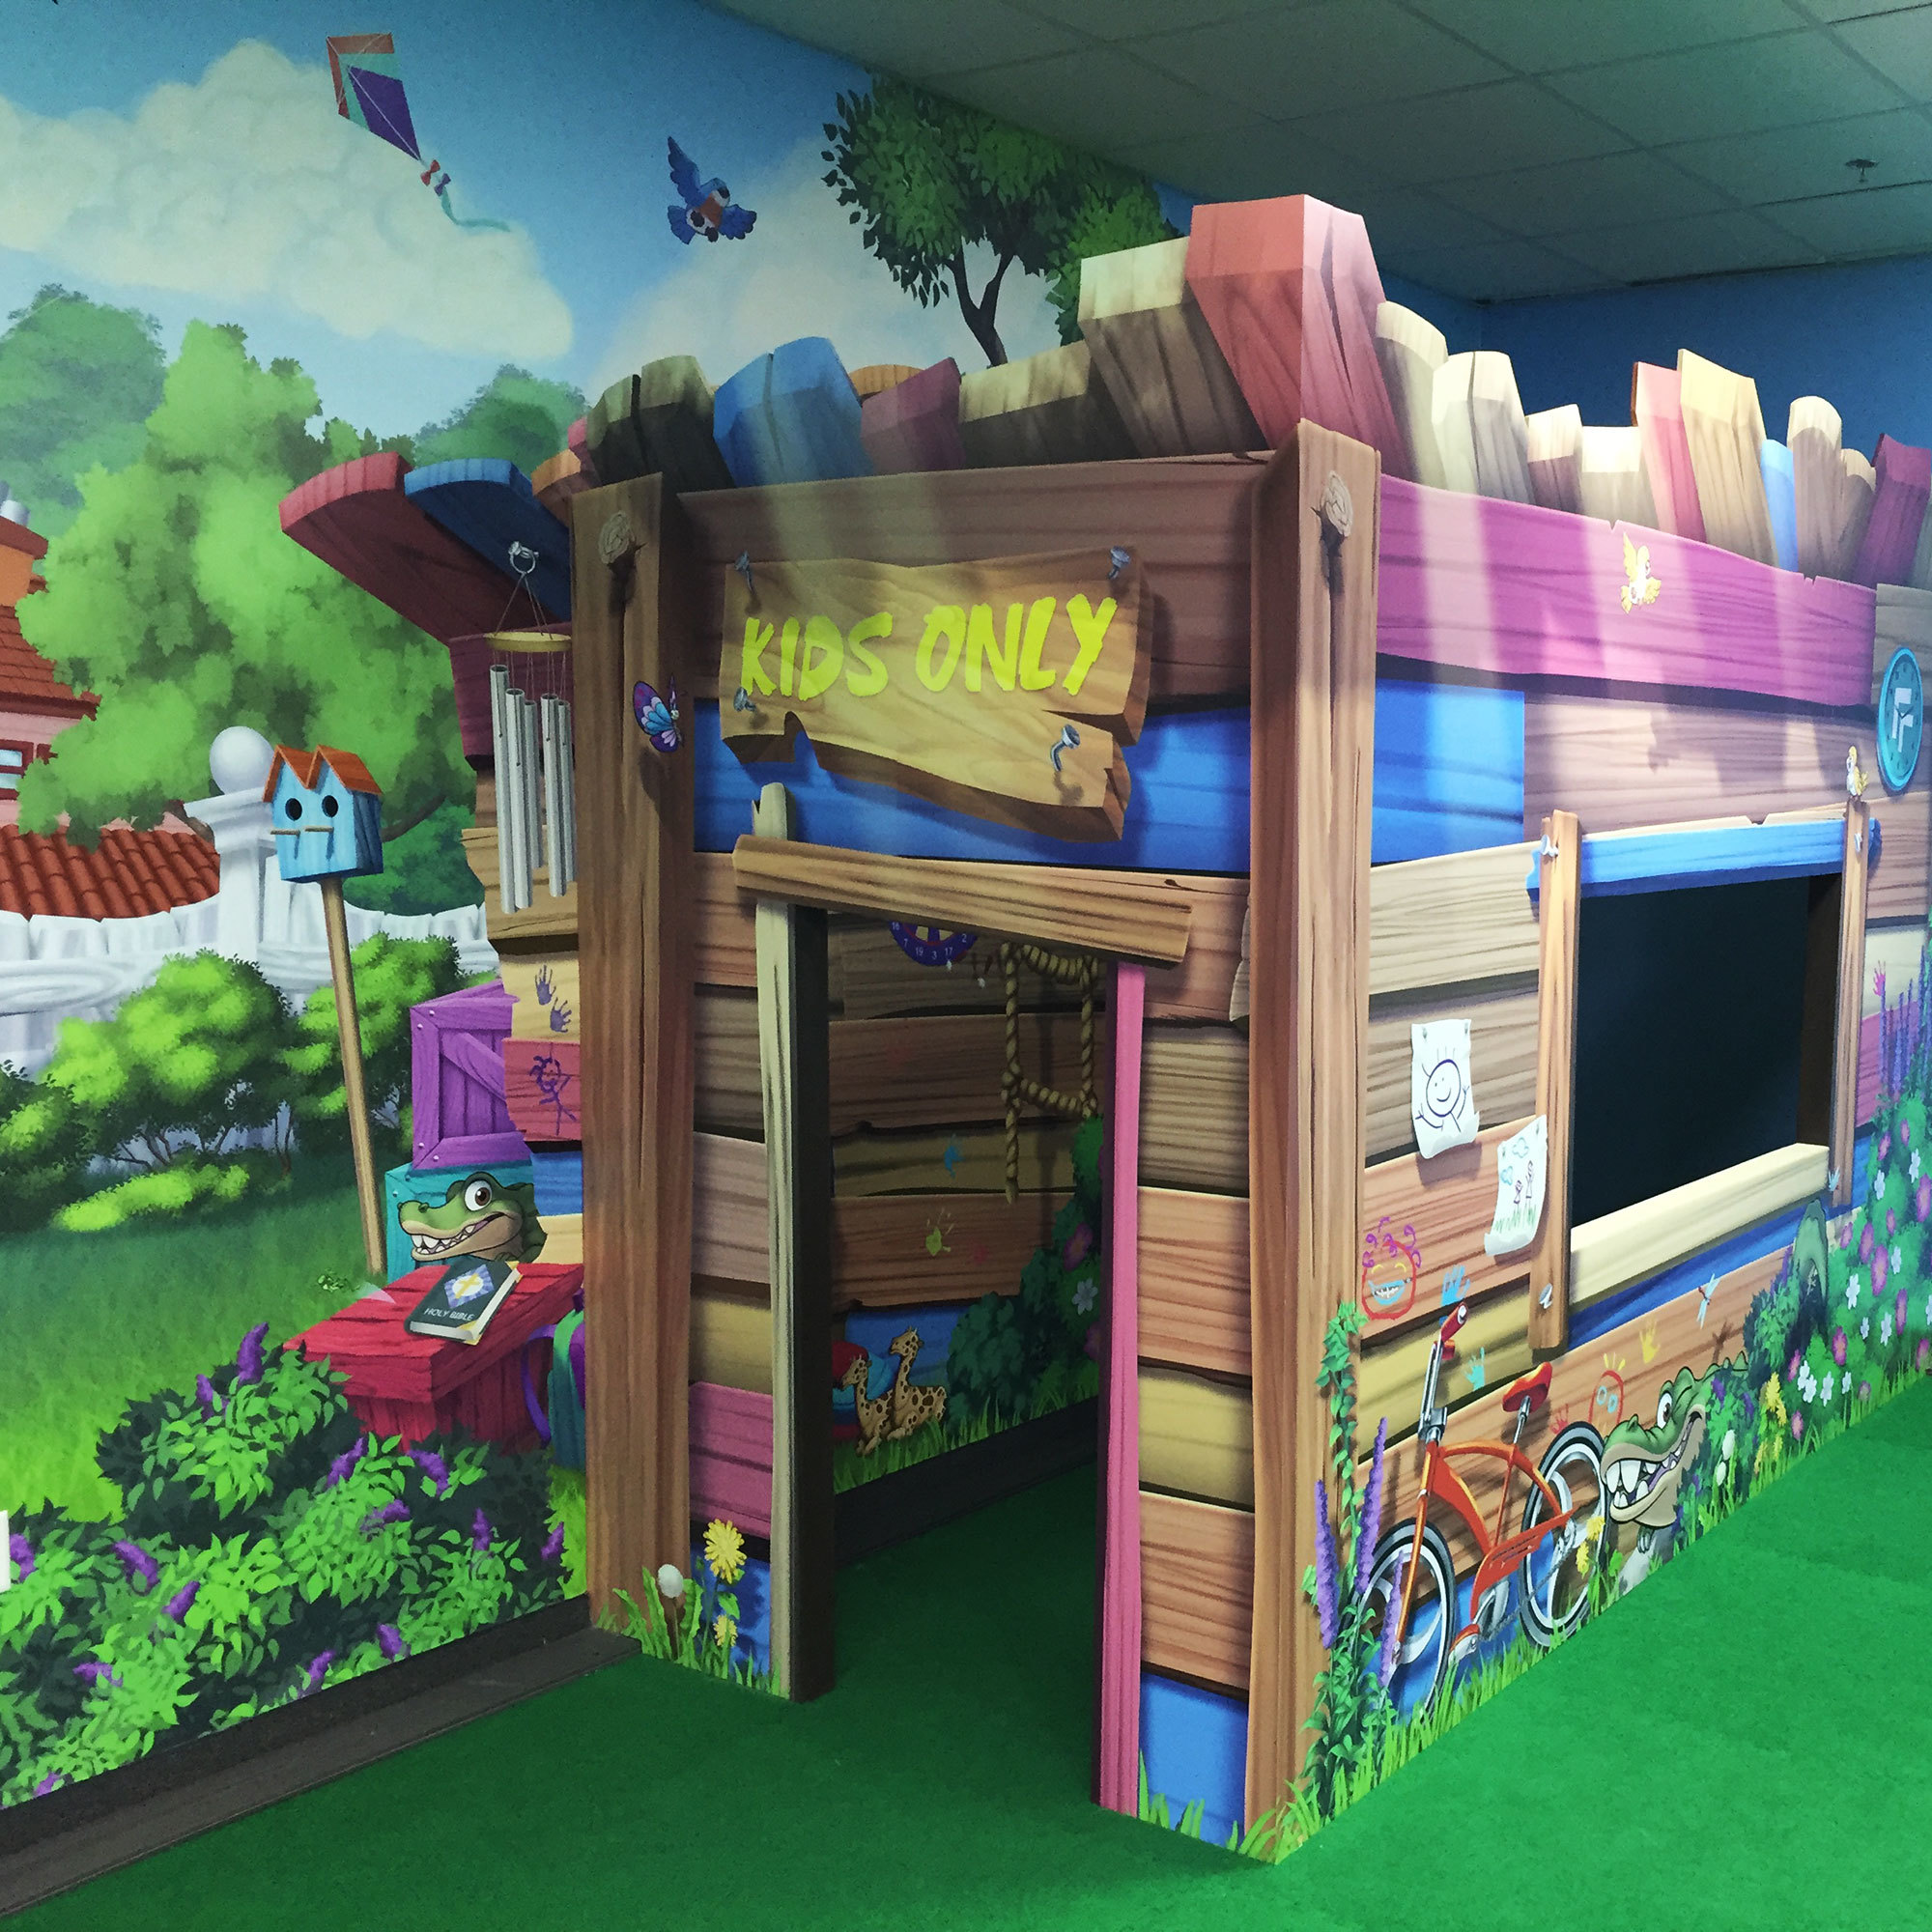 2D Cutout Created Clubhouse in Neighborhood Themed Space at a Church